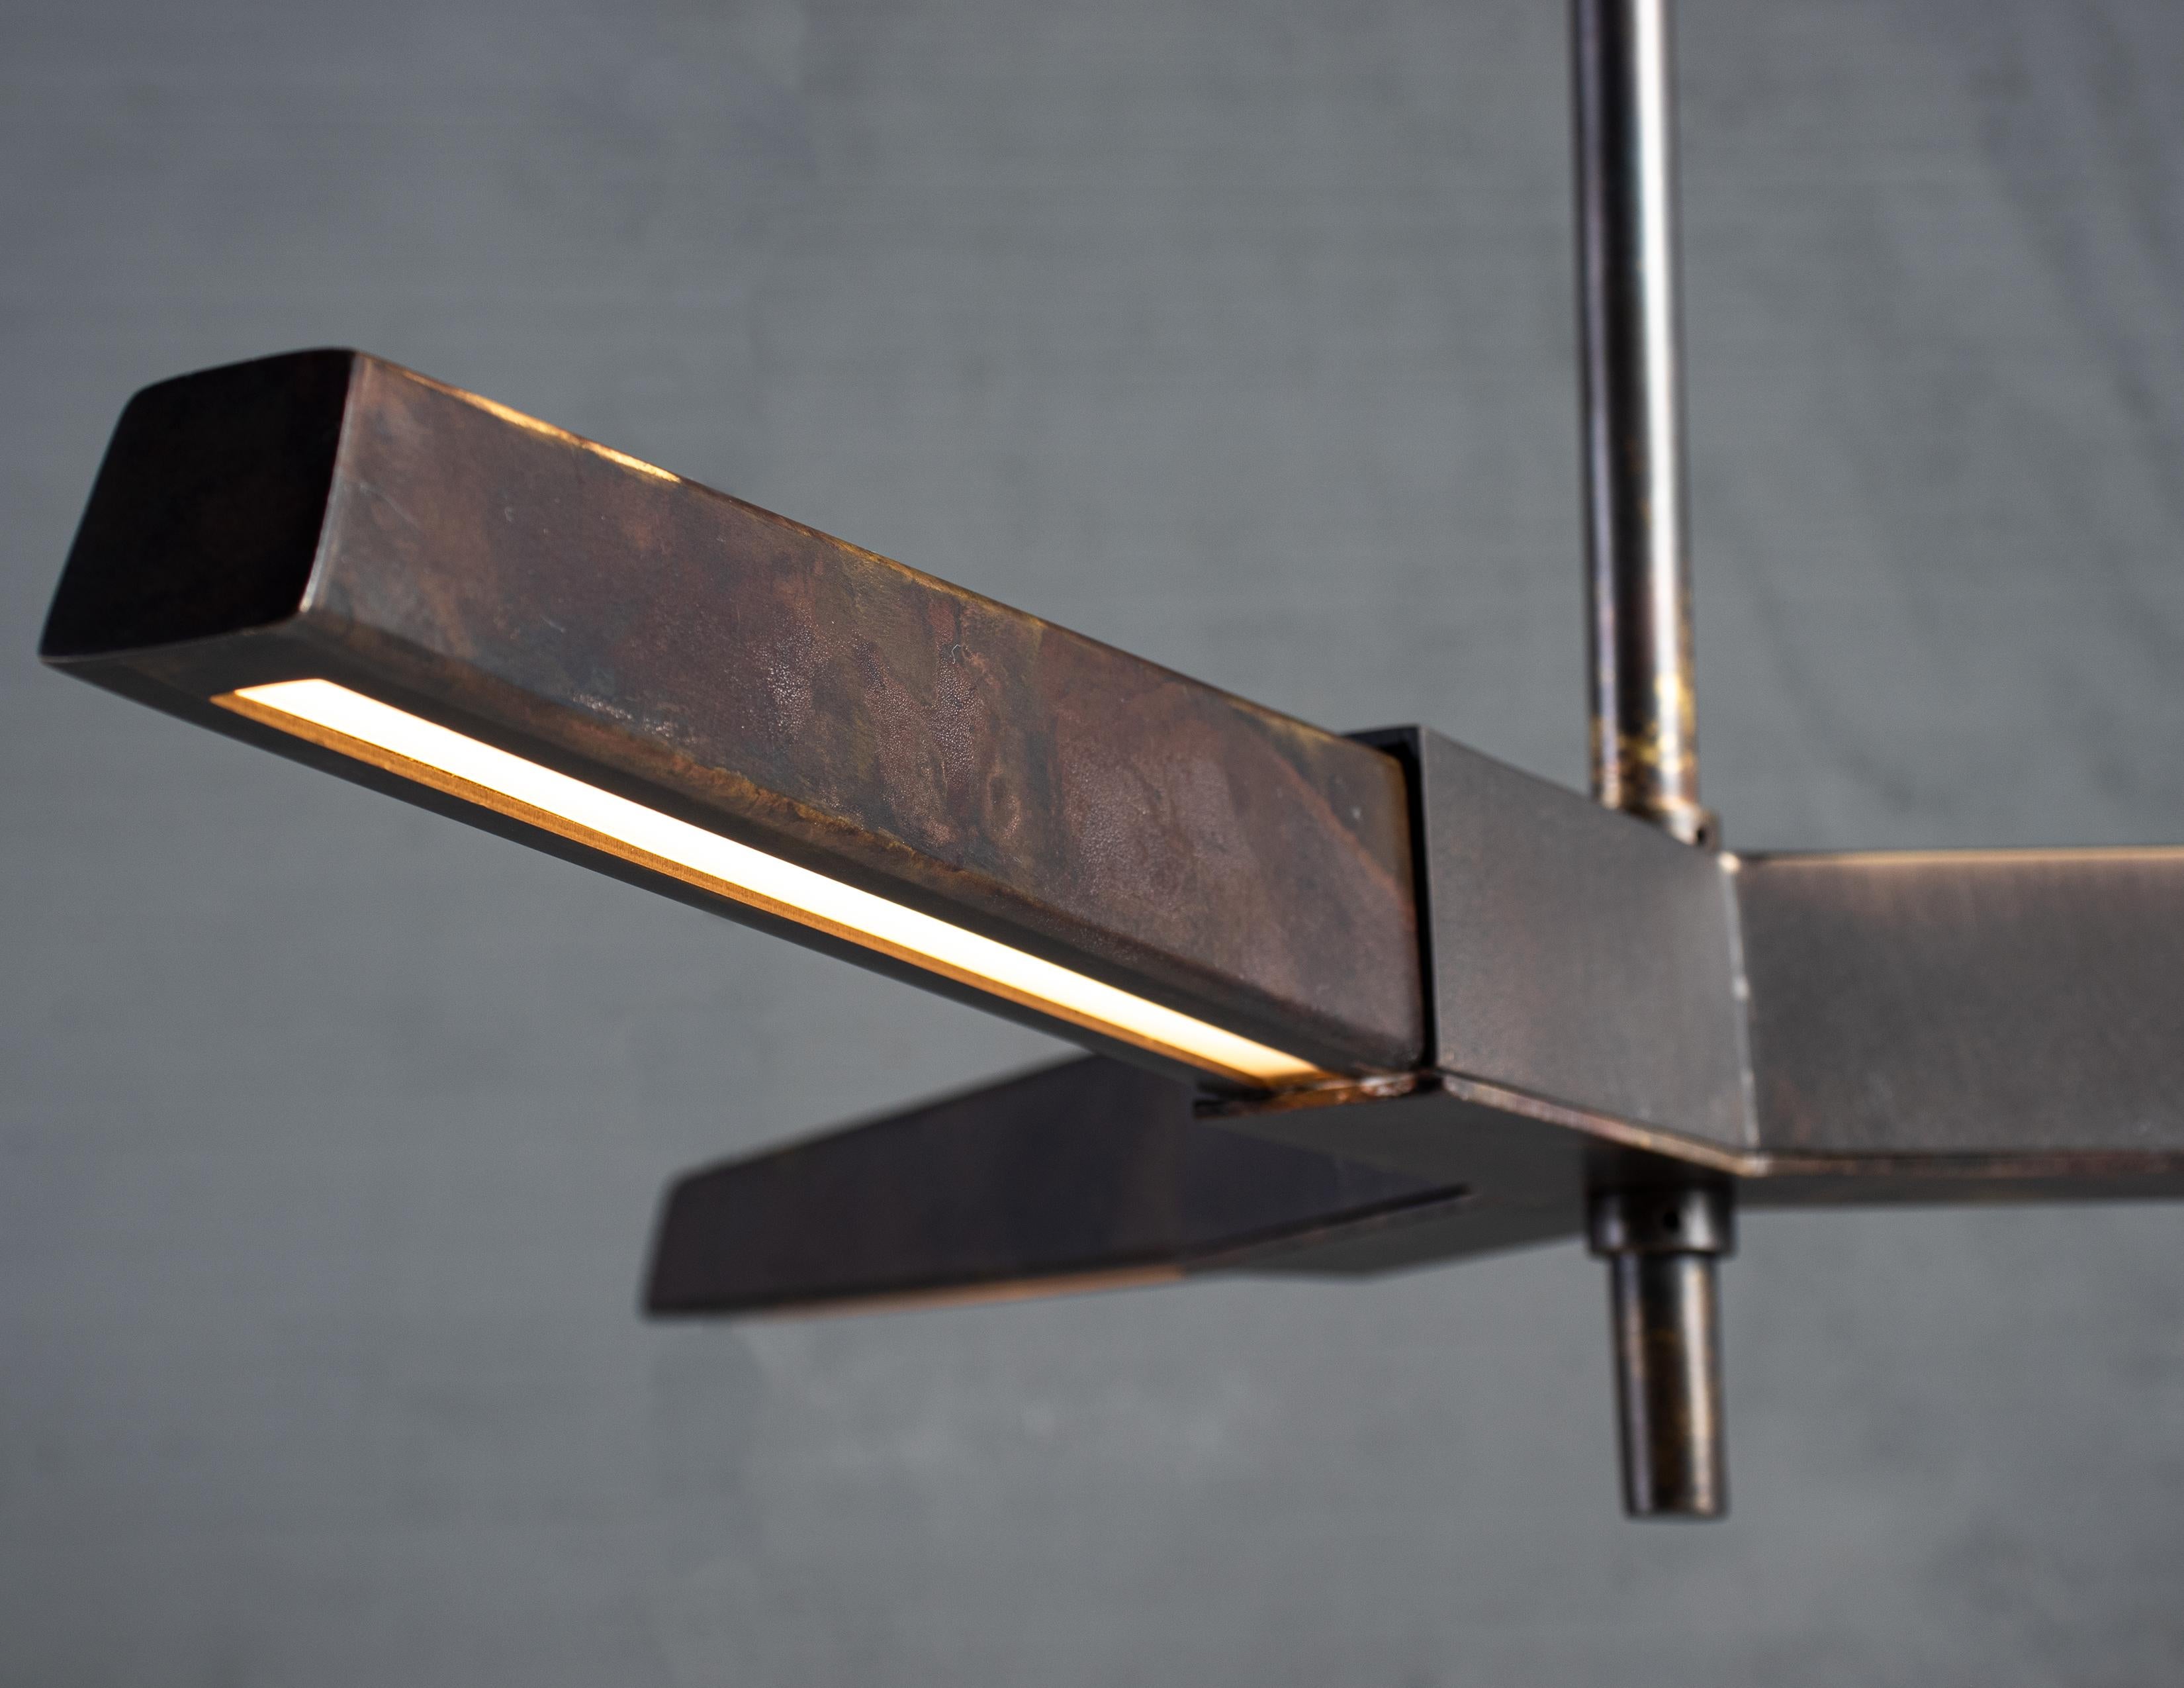 Hand-Crafted RENG, Buki I, Forged Steel, Rustic Modern Brass and Steel Suspension Light